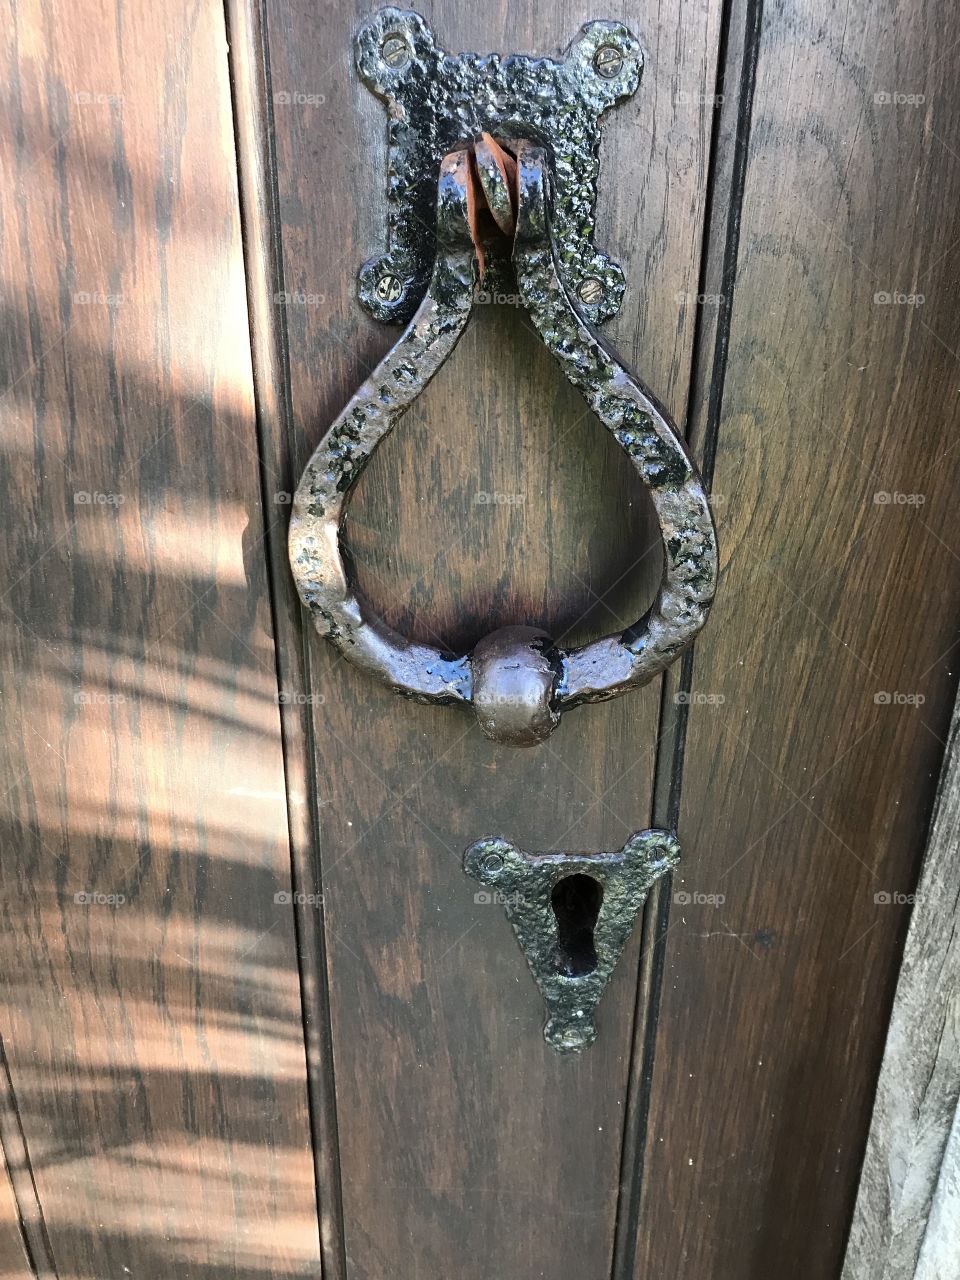 Another quality door knocker to add to my collection